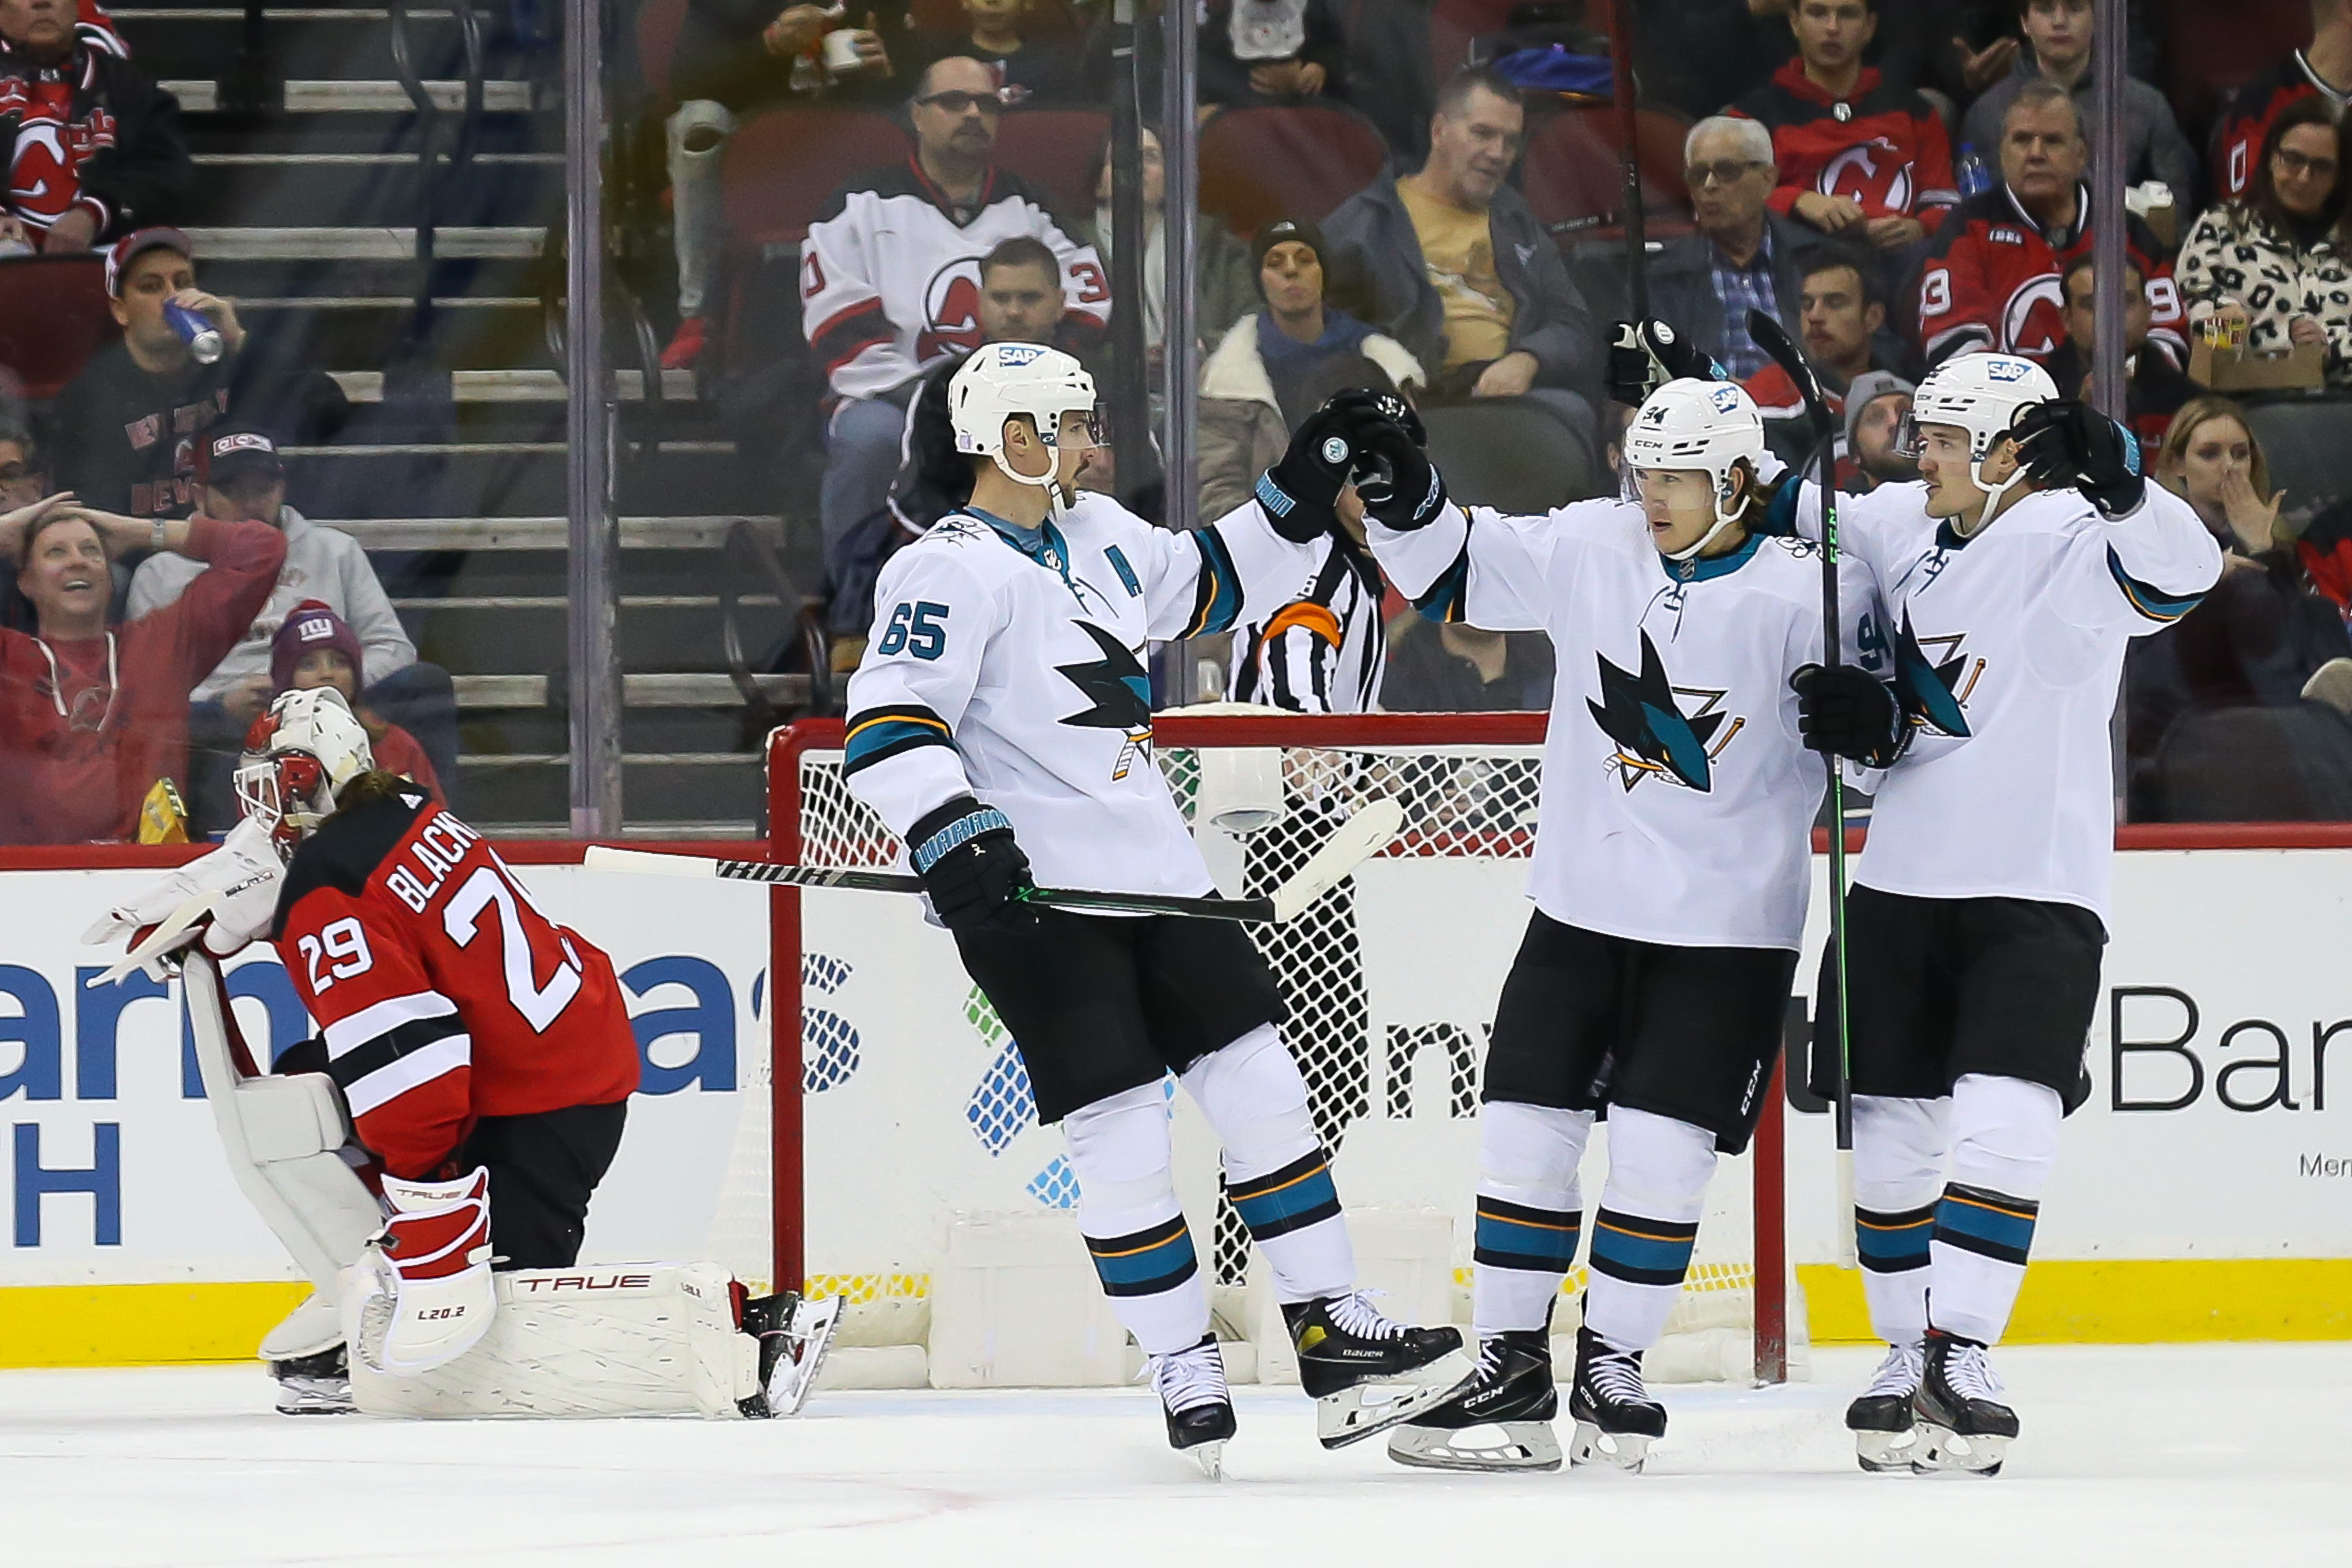 Ex-Sharks star Timo Meier scores goal to help Devils win in his debut – NBC  Sports Bay Area & California